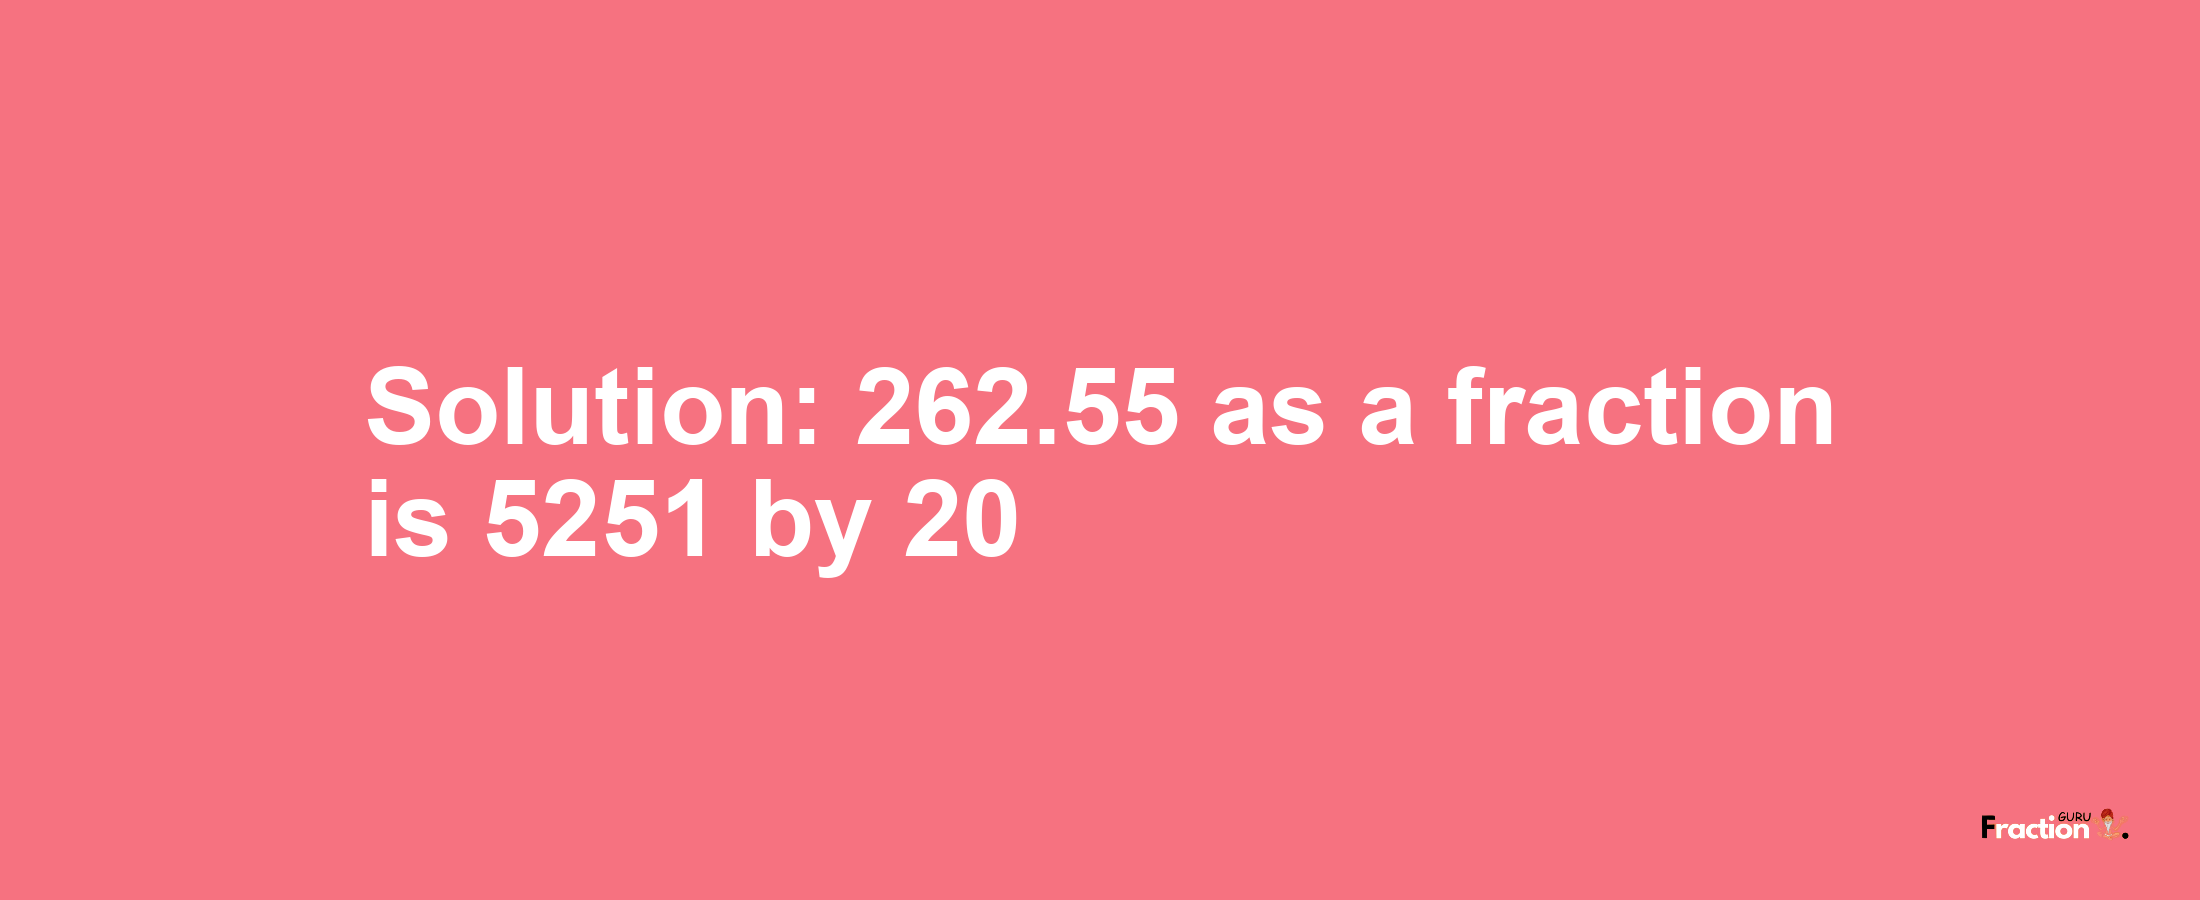 Solution:262.55 as a fraction is 5251/20